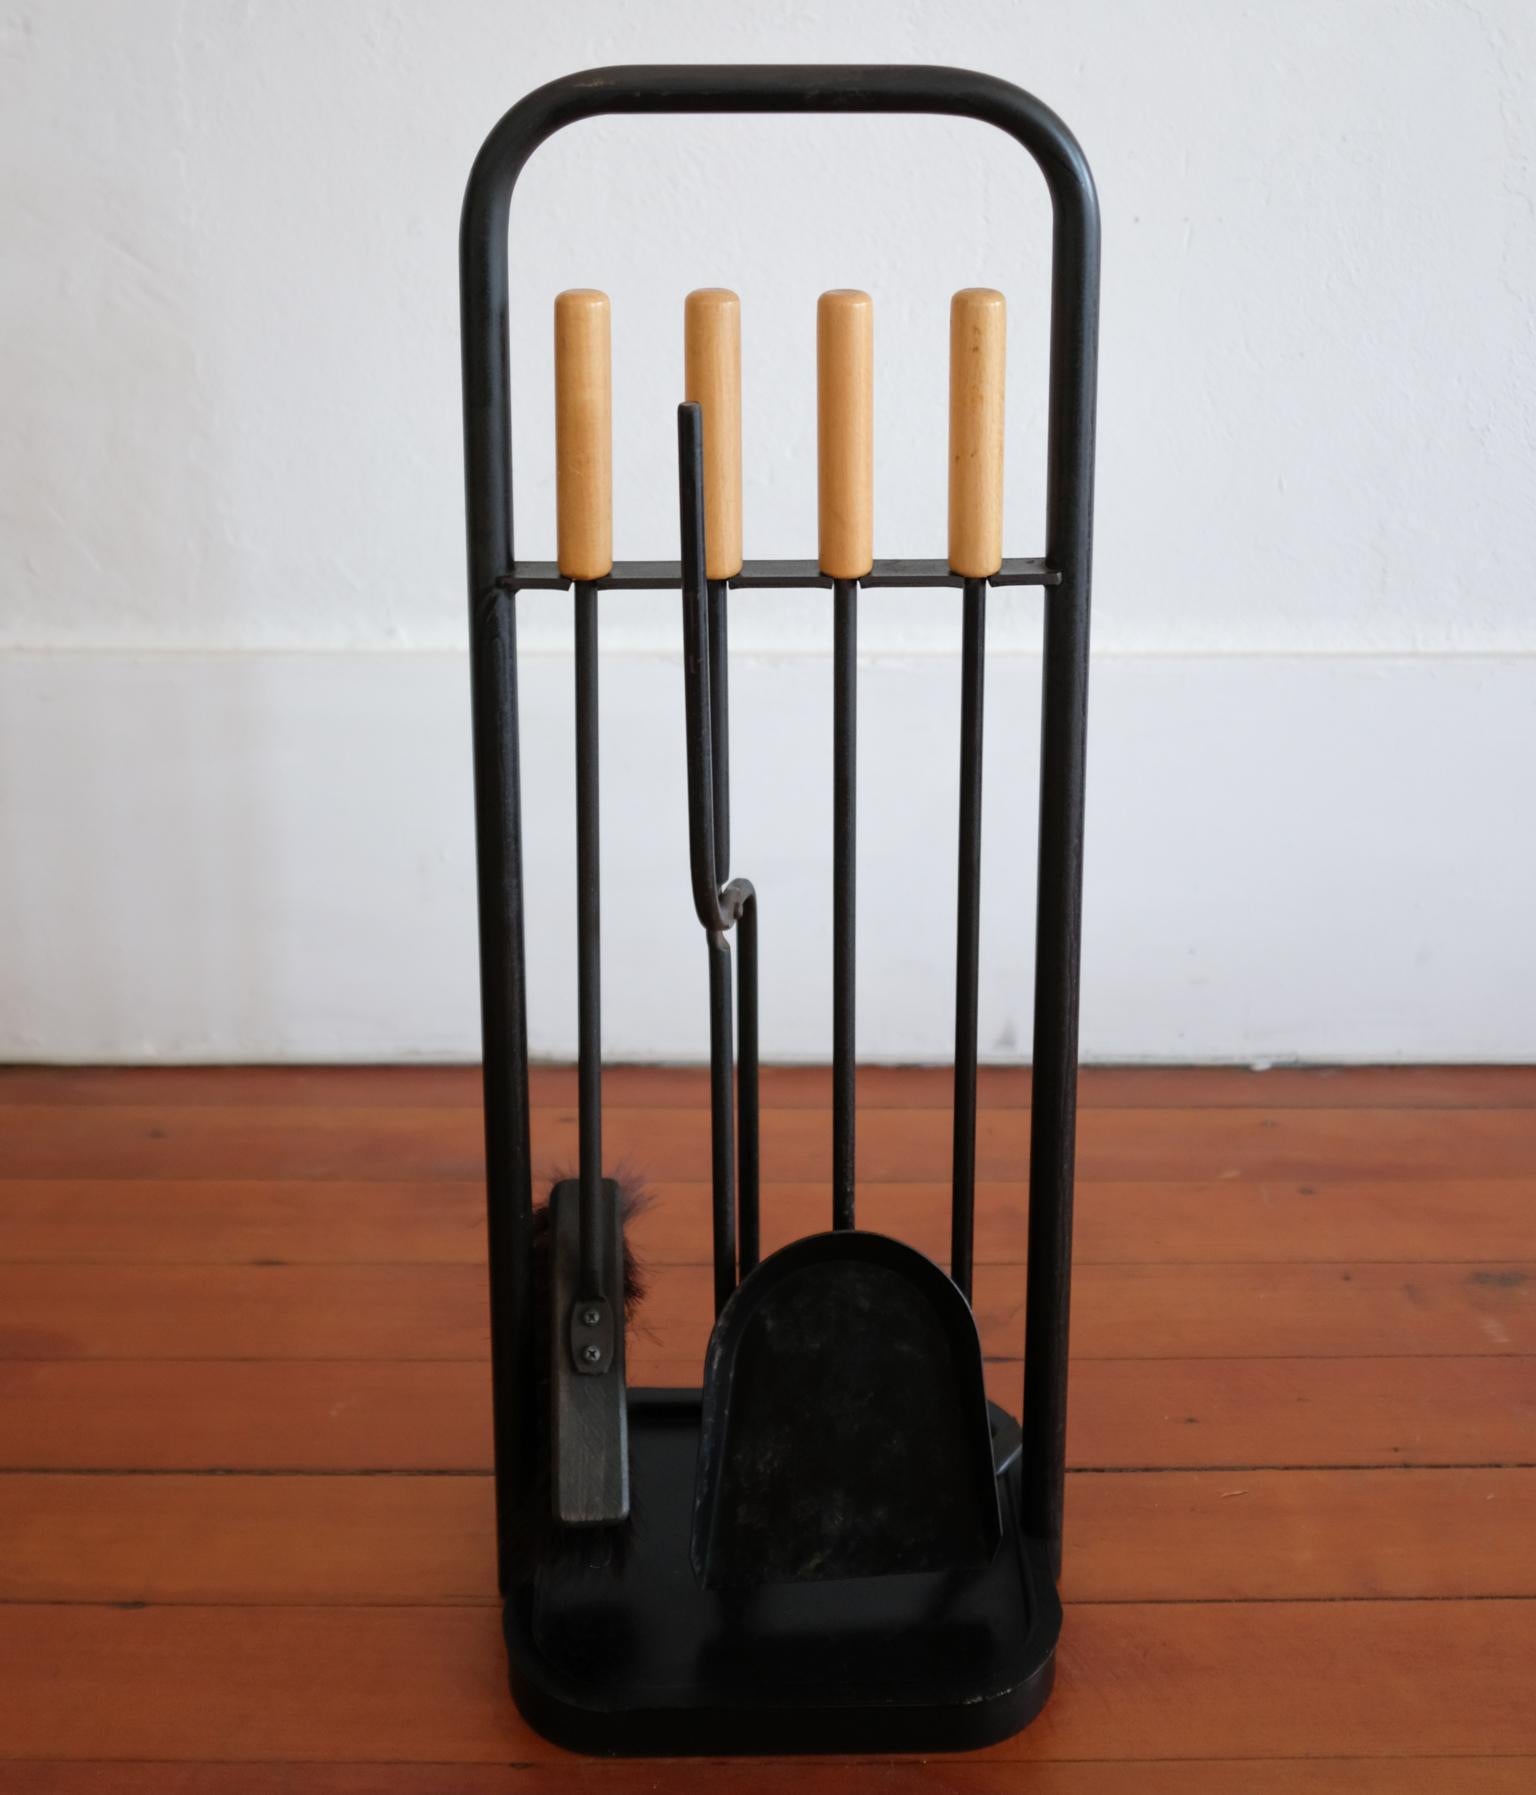 Midcentury Modernist Fireplace Tools, 1960s In Good Condition For Sale In San Diego, CA